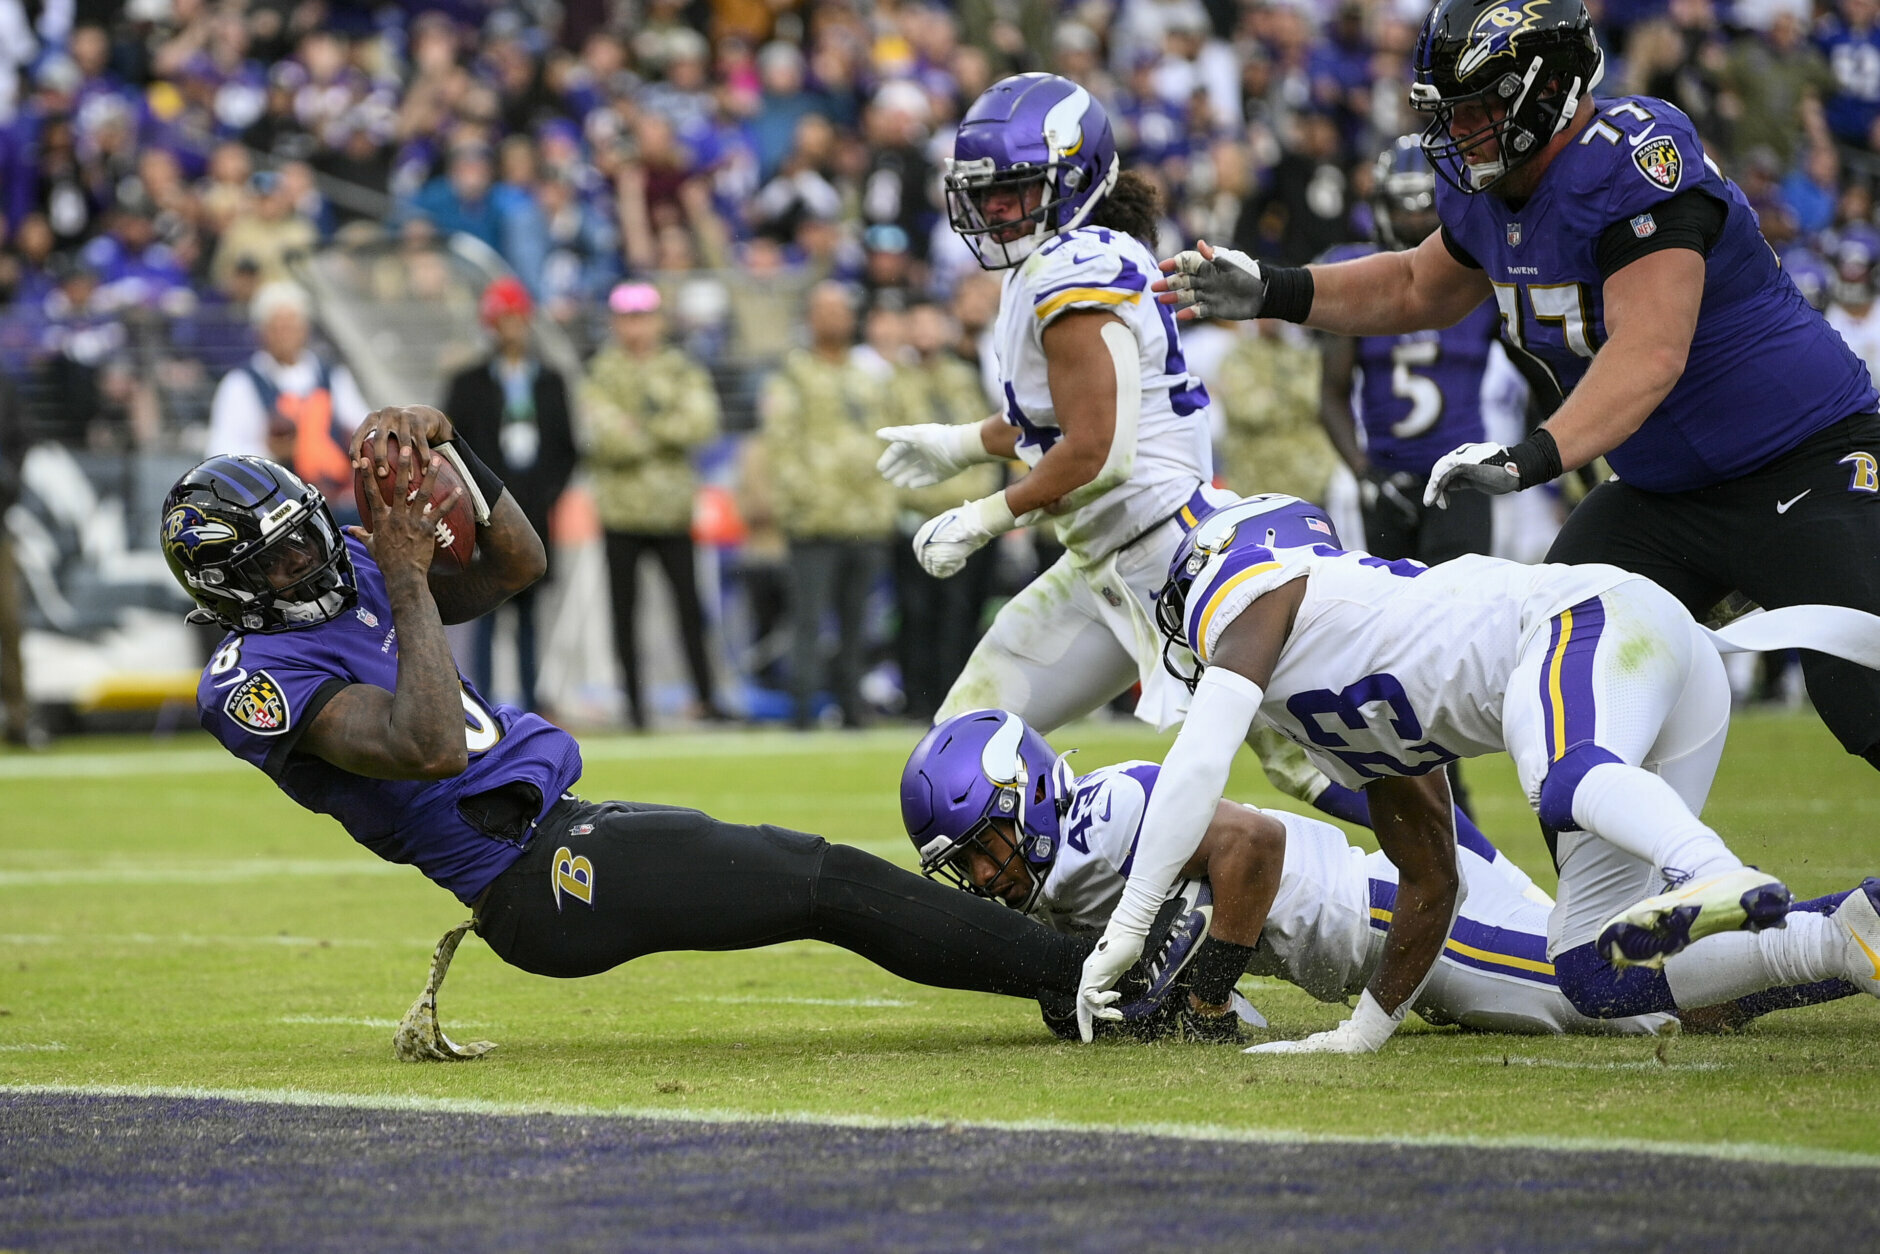 <p><em><strong>Vikings 31</strong></em><br />
<em><strong>Ravens 34 (OT)</strong></em></p>
<p>Lamar Jackson had yet another &#8220;double triple,&#8221; notched his 12th career 100-yard rushing game to break Mike Vick&#8217;s record among QBs and became the first QB to have multiple games with three passing touchdowns and over 100 rushing yards. Oh, did I mention this is Baltimore&#8217;s third double-digit comeback victory? Jackson <em>IS</em> the Ravens offense so just go ahead and give this man his Offensive Player of the Year and matching MVP, already.</p>
